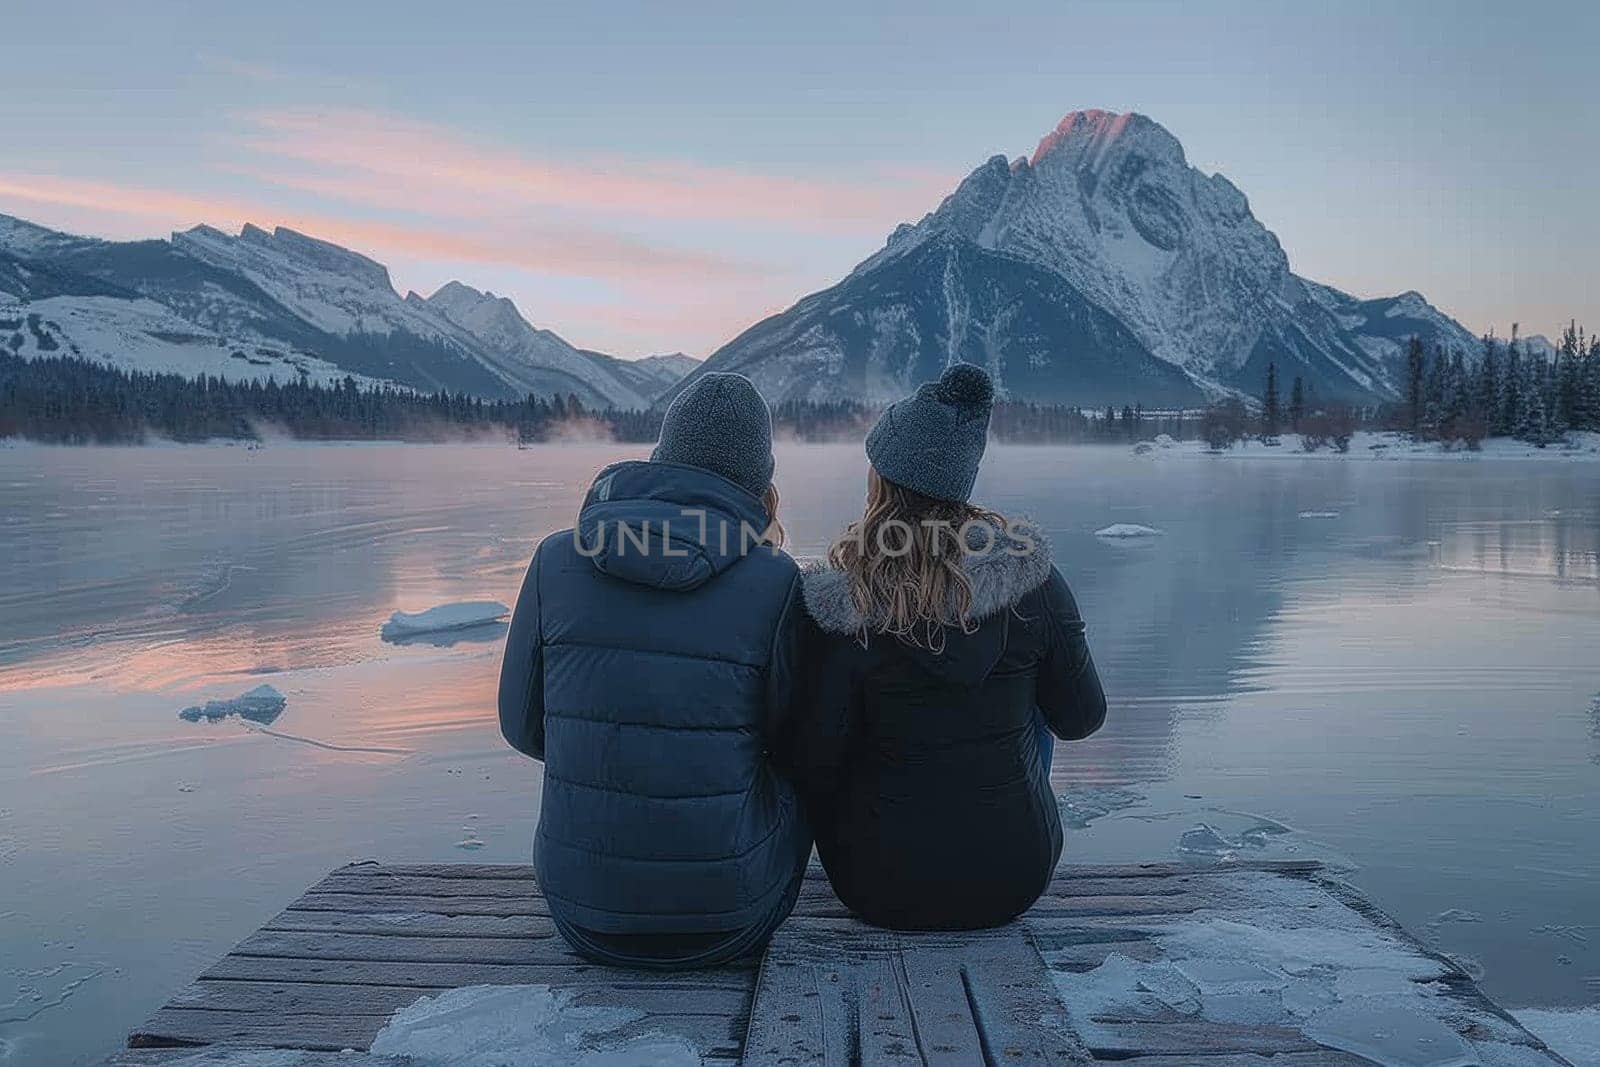 A couple is sitting on a dock overlooking a lake. The man is wearing a black jacket and the woman is wearing a blue jacket. The sky is orange and the mountains in the background are covered in snow